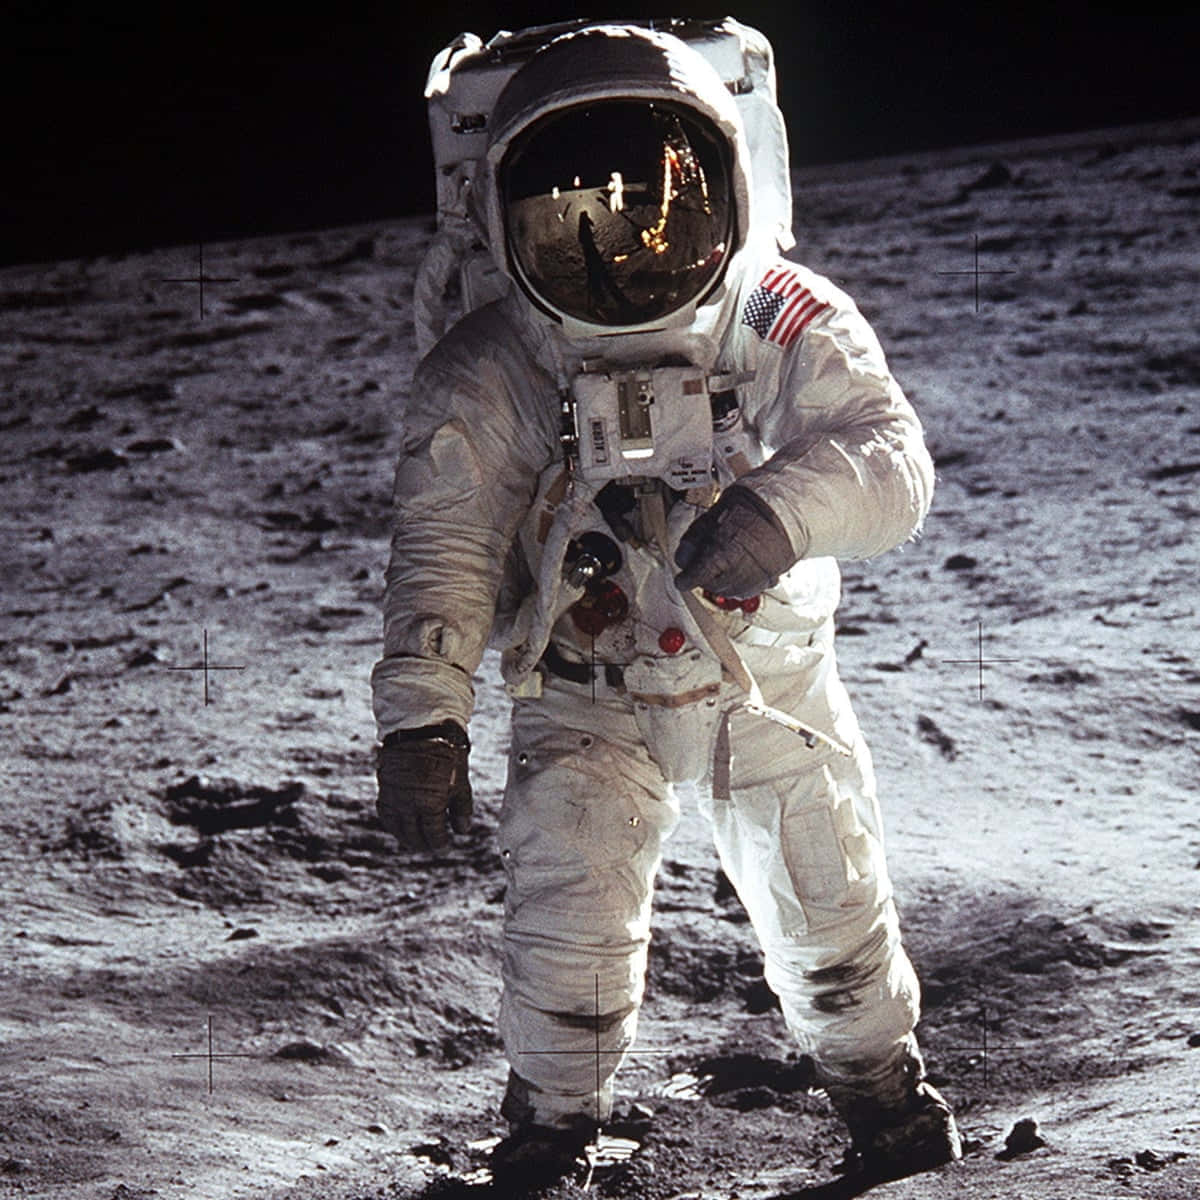 A Man In A Space Suit Walking On The Moon